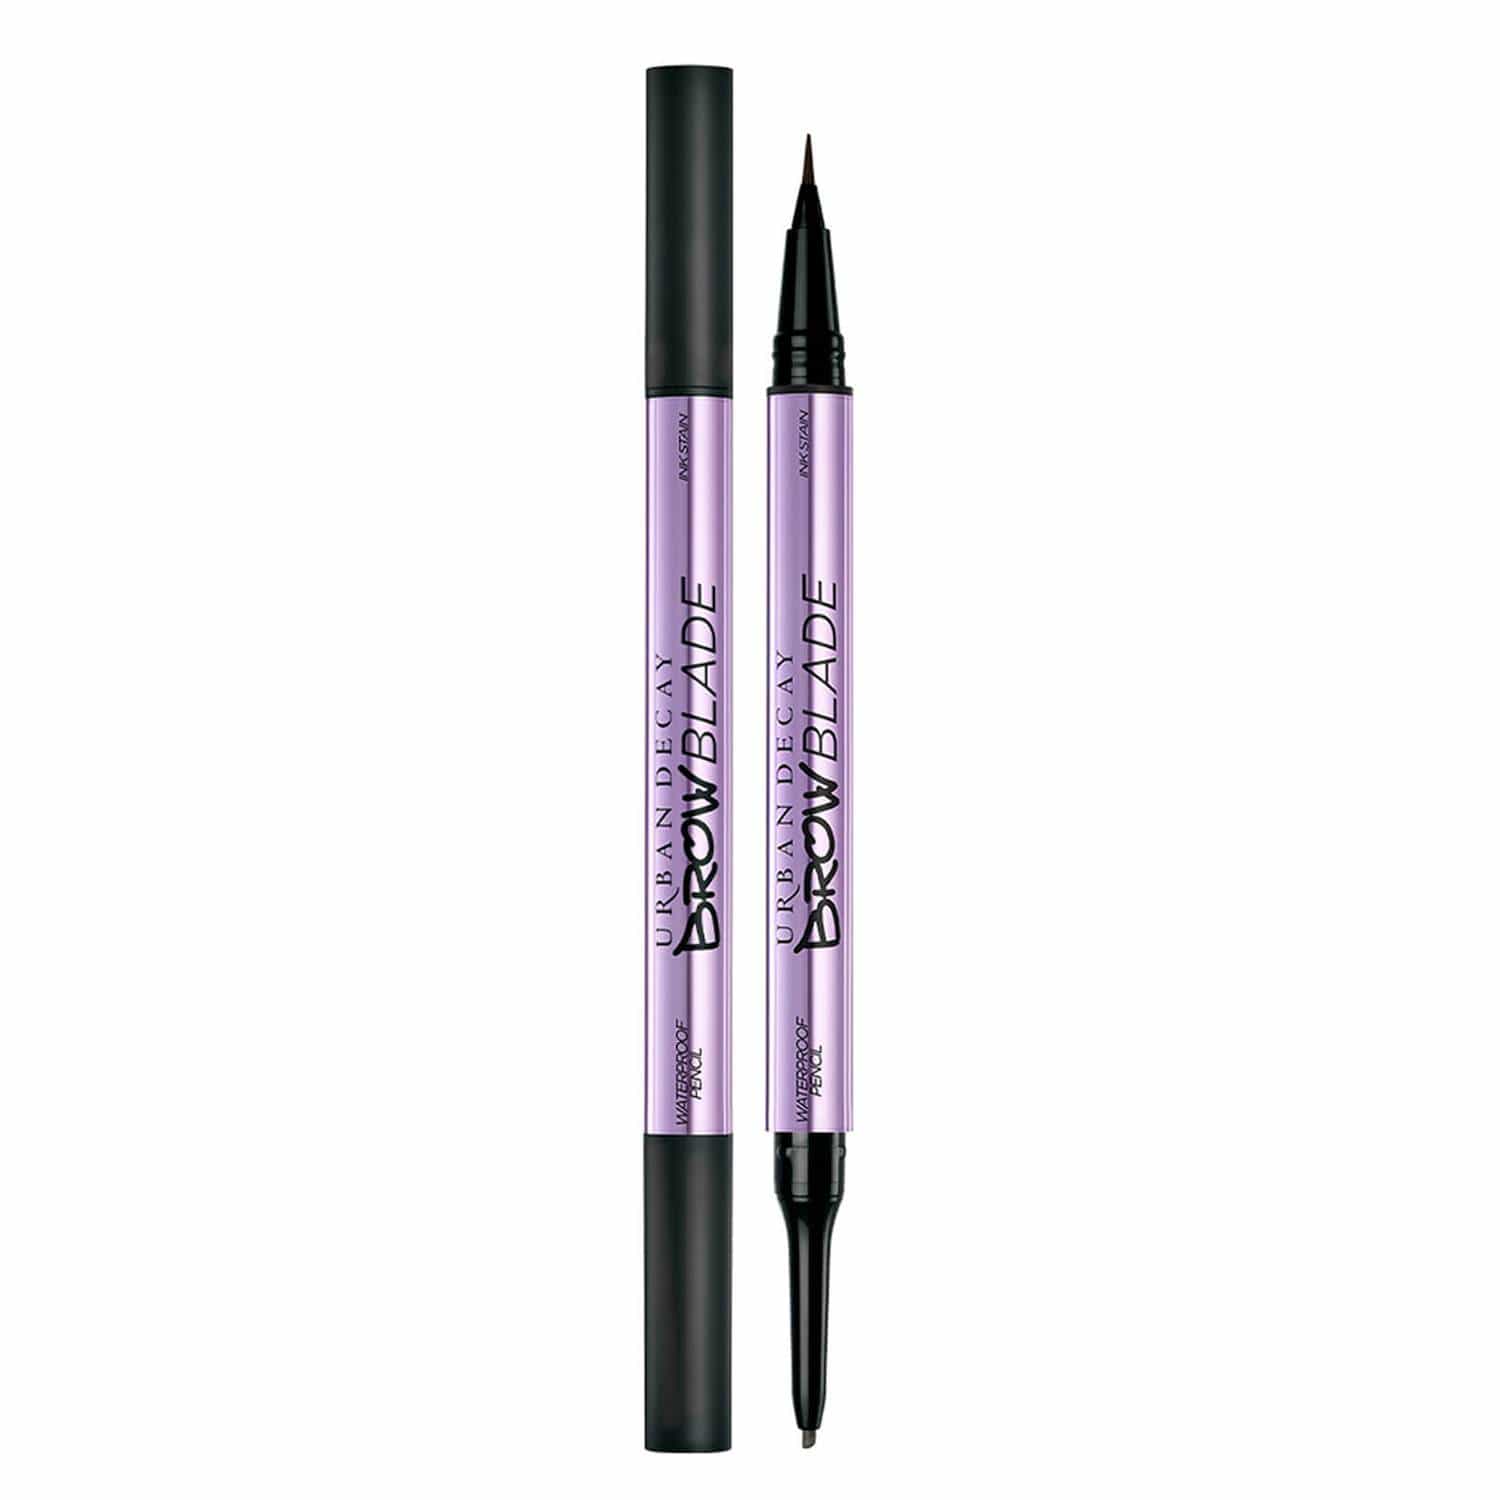 Urban Decay Beauty Uarban Decay Brow Blade Doubled-Ended Ink Stain & Waterproof Pencil